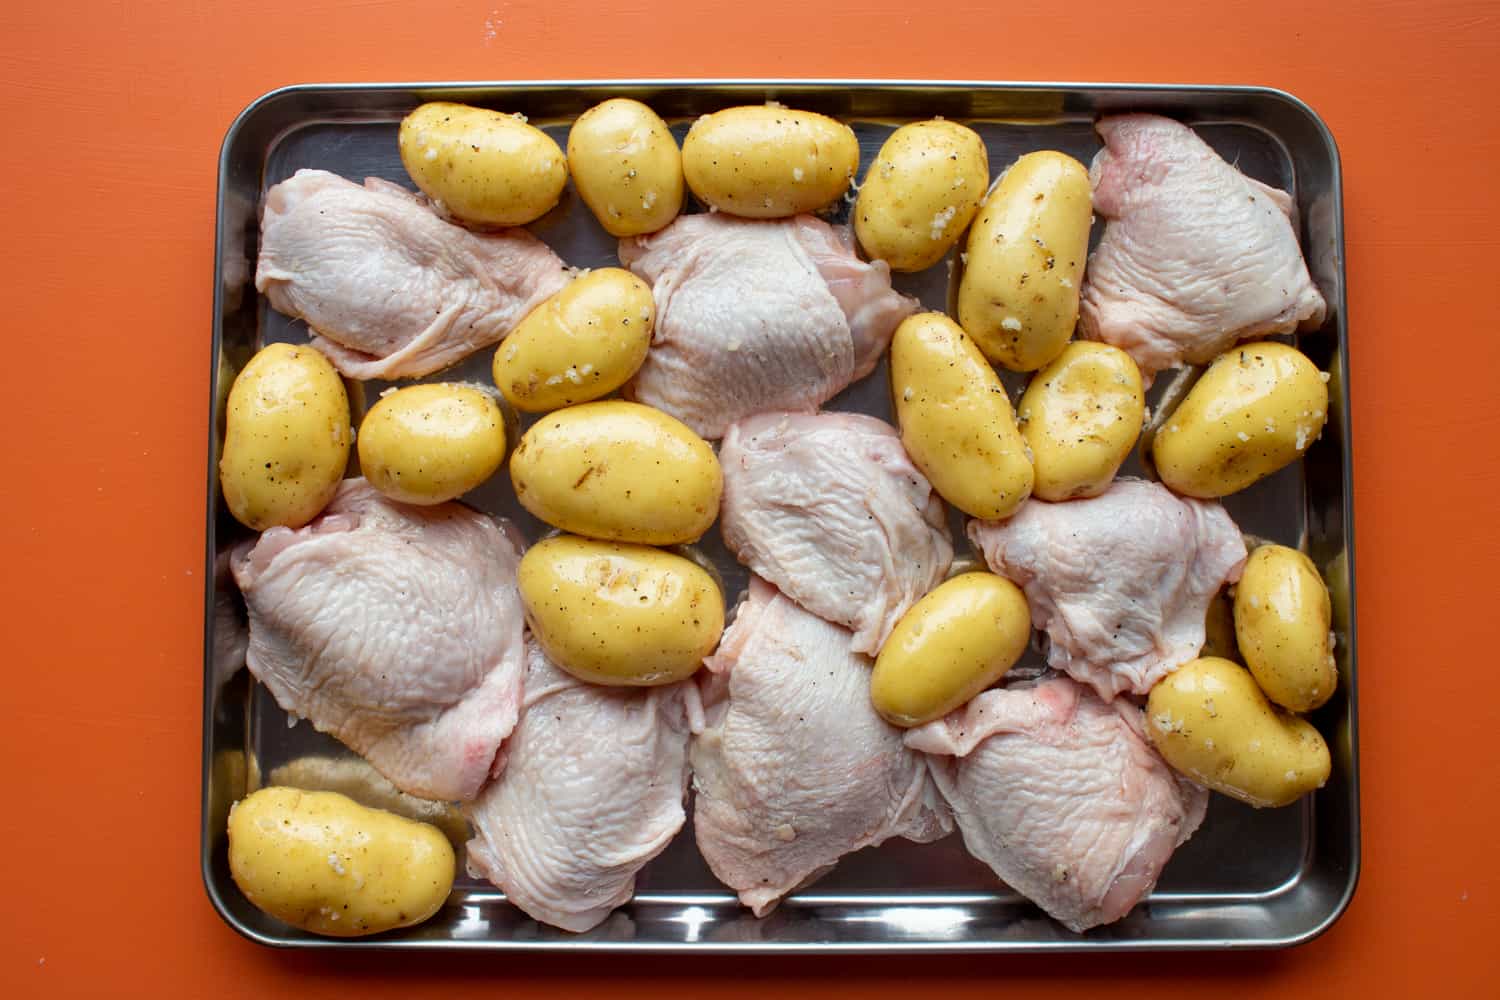 Chicken thighs and new potatoes on a stainless steel baking tray on an orange background.